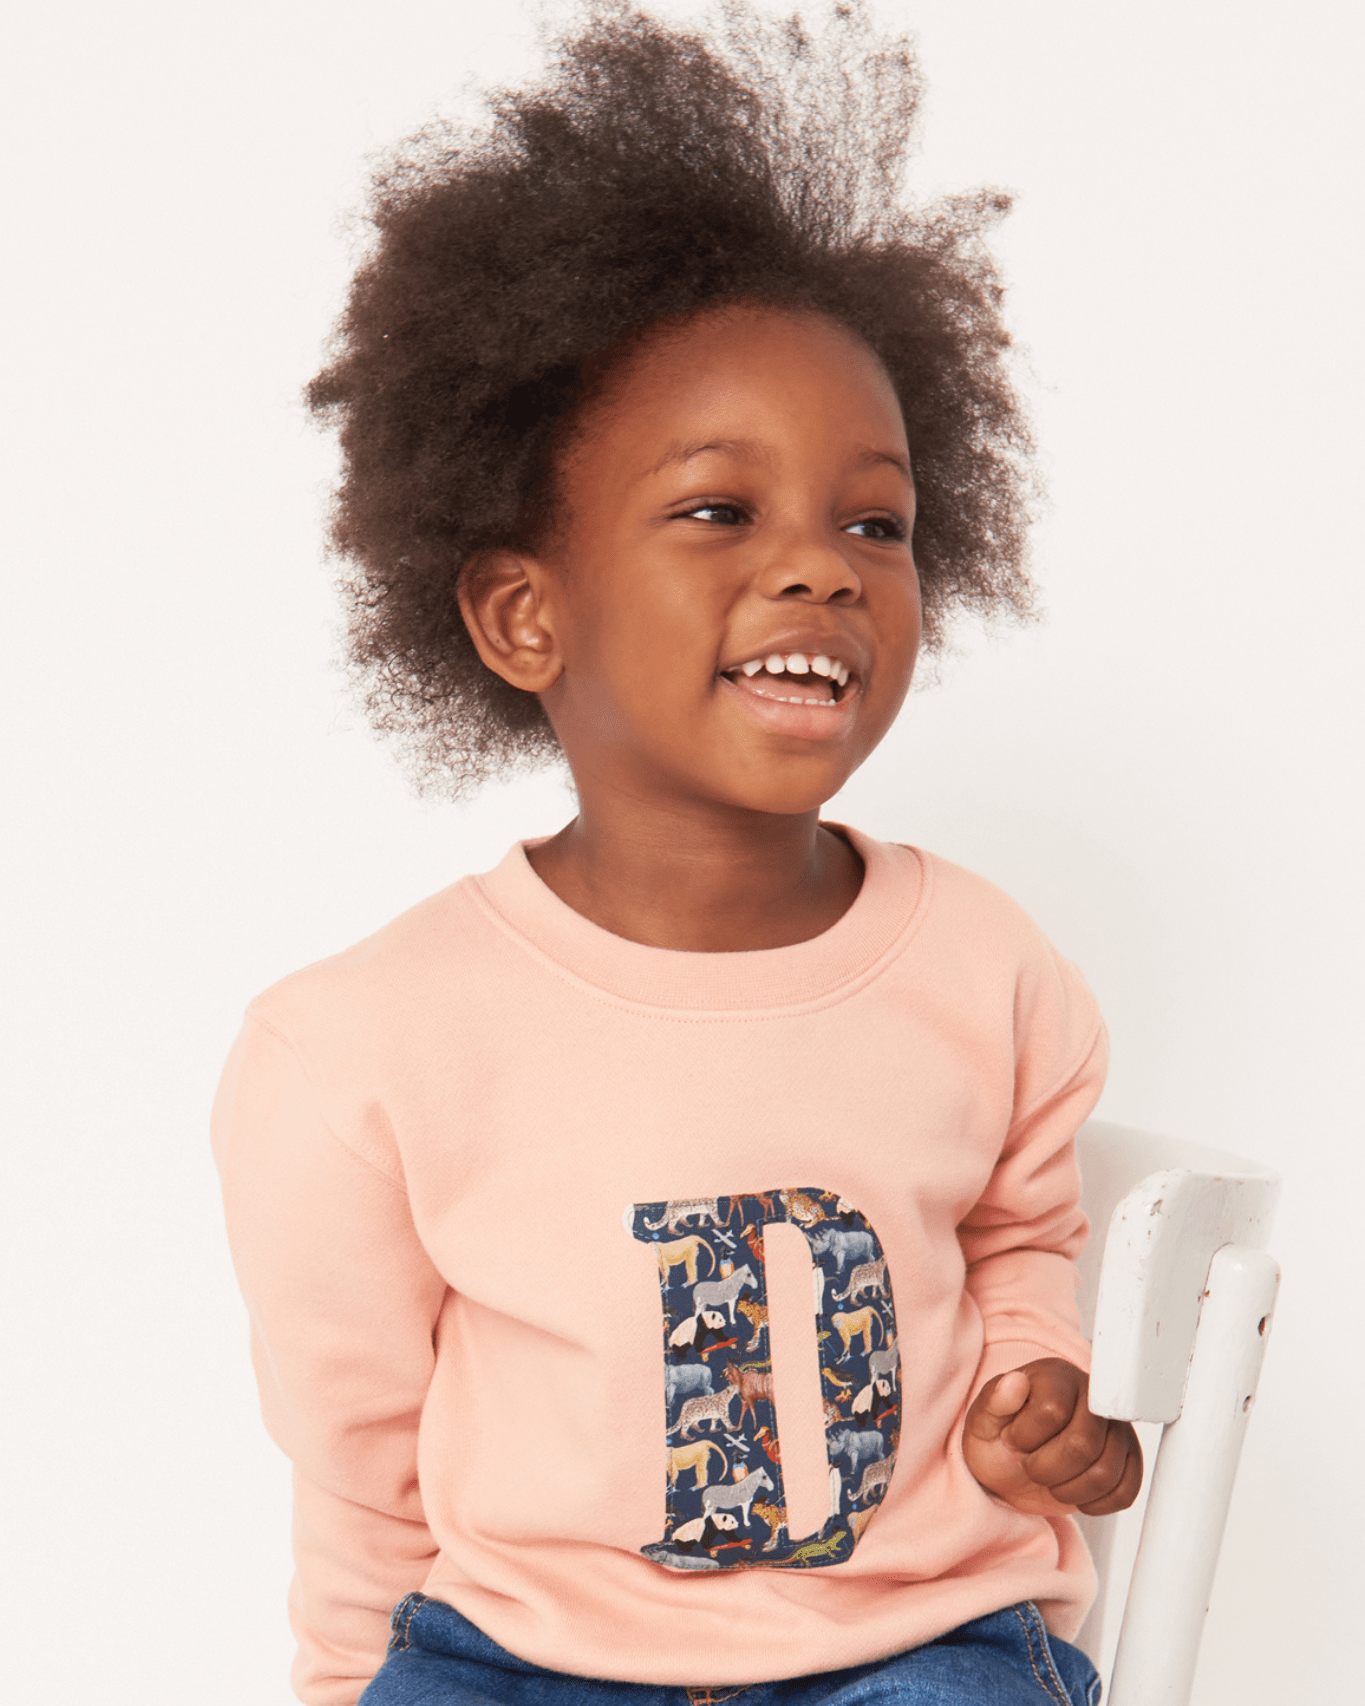 Magnificent Stanley sweatshirt CREATE YOUR OWN Dusty Pink Sweatshirt in Choice of Liberty Print